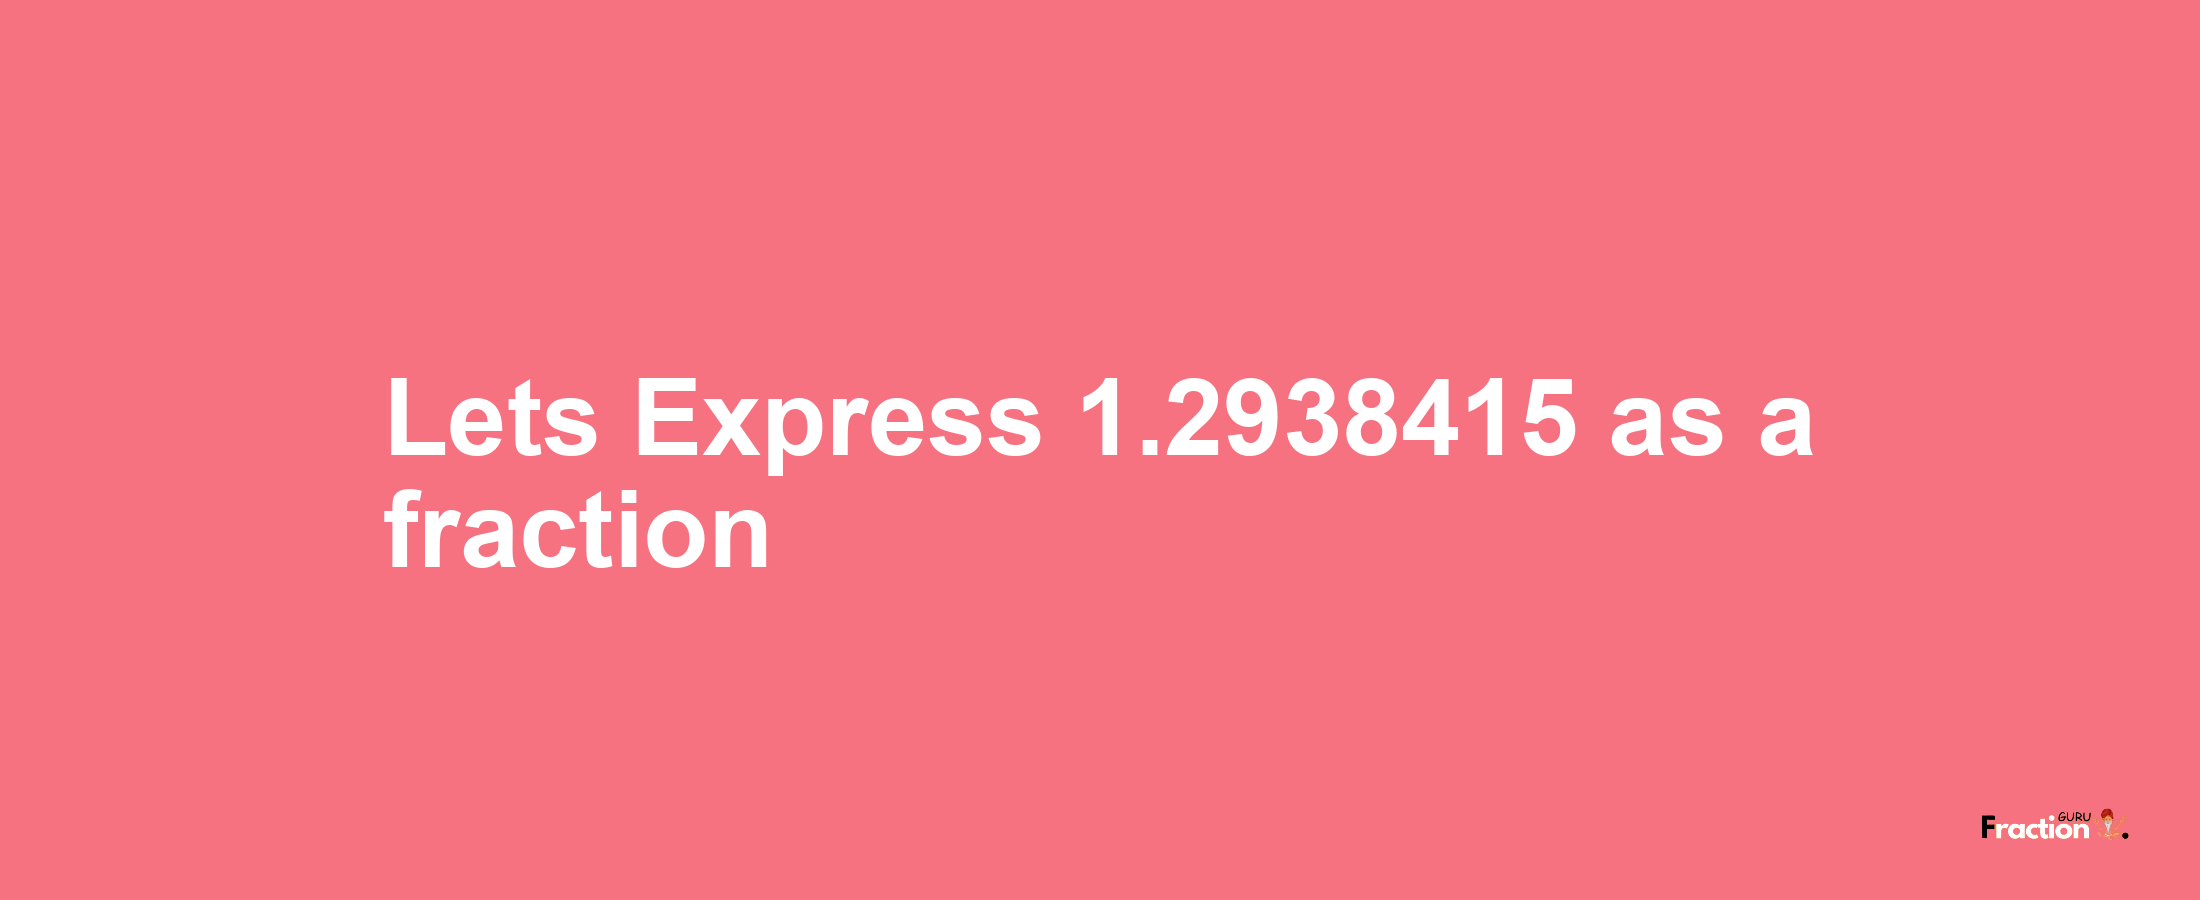 Lets Express 1.2938415 as afraction